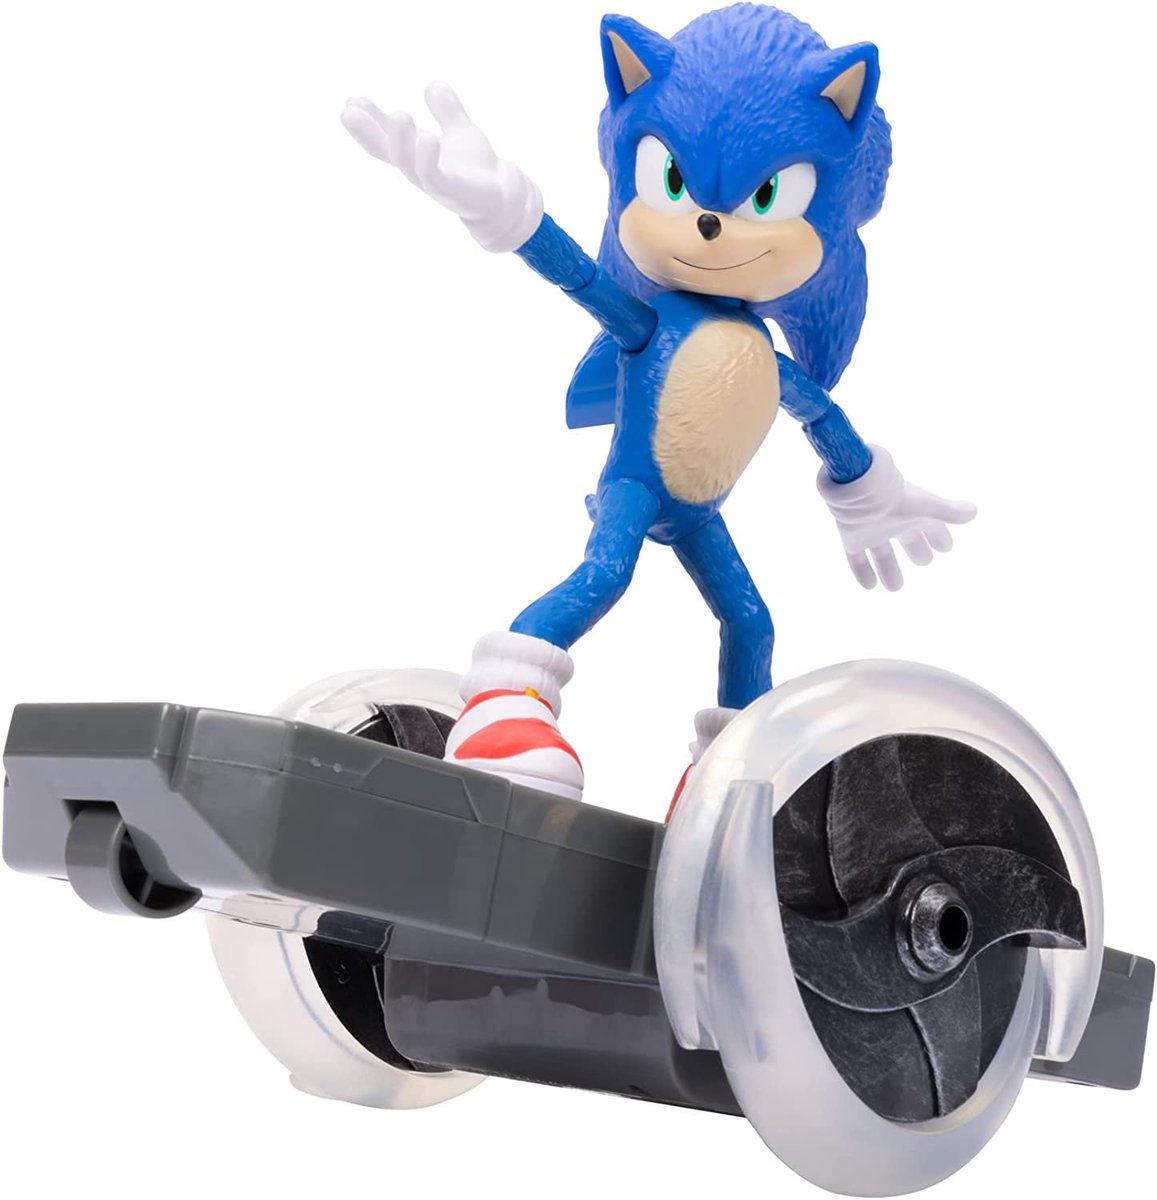 Sonic the Hedgehog Sonic 2 Movie - Sonic Speed RC Vehicle is $23.99 on Amazon after listed coupon https://t.co/hODojes5tc #ad https://t.co/ElFuUWY0h2